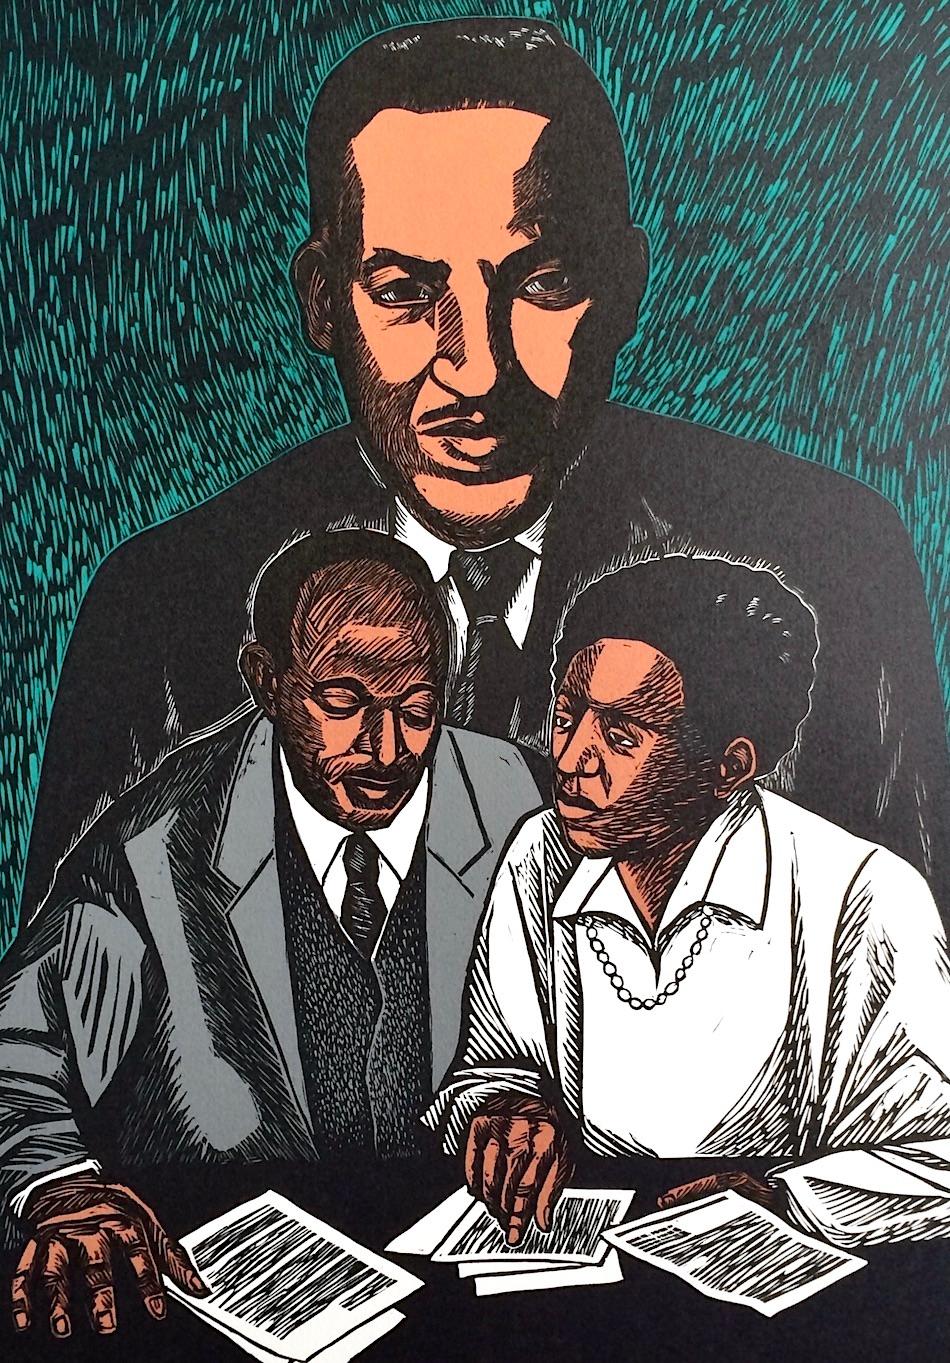 CRUSADERS FOR JUSTICE Signed Linocut, Thurgood Marshall Portrait, Civil Rights - Contemporary Print by Elizabeth Catlett